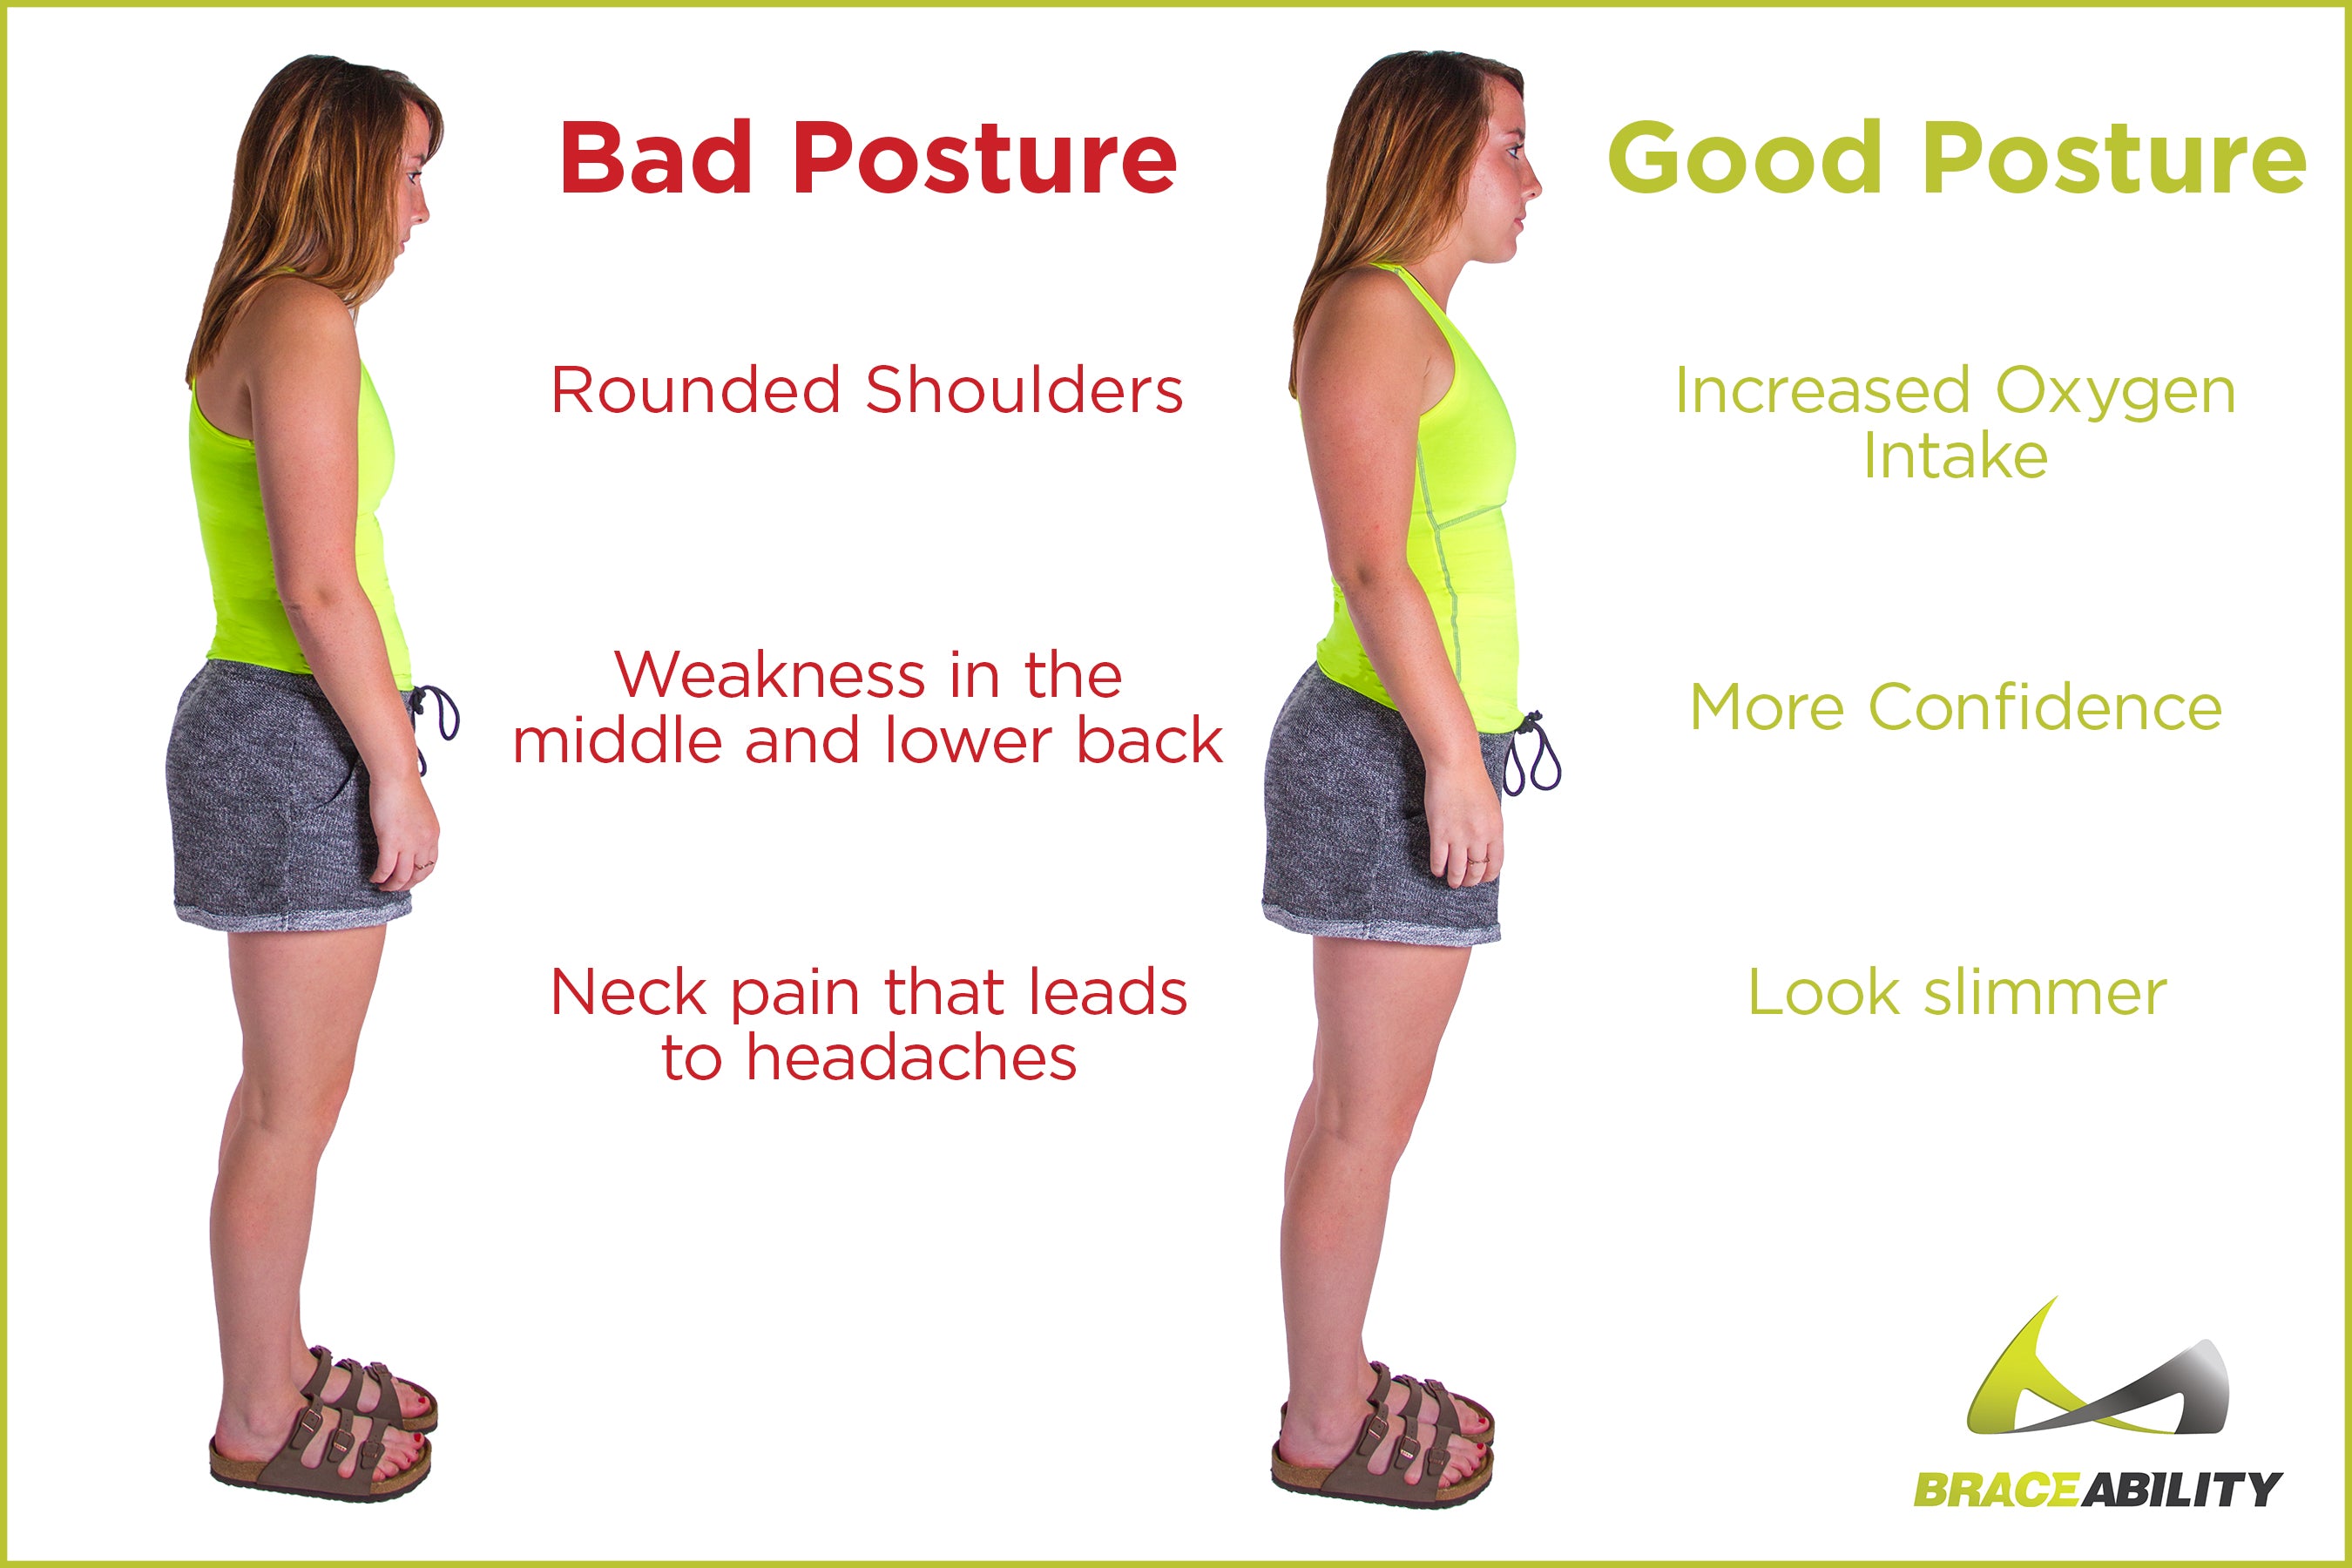 Using a posture brace from BraceAbility can help you feel taller and look slimmer